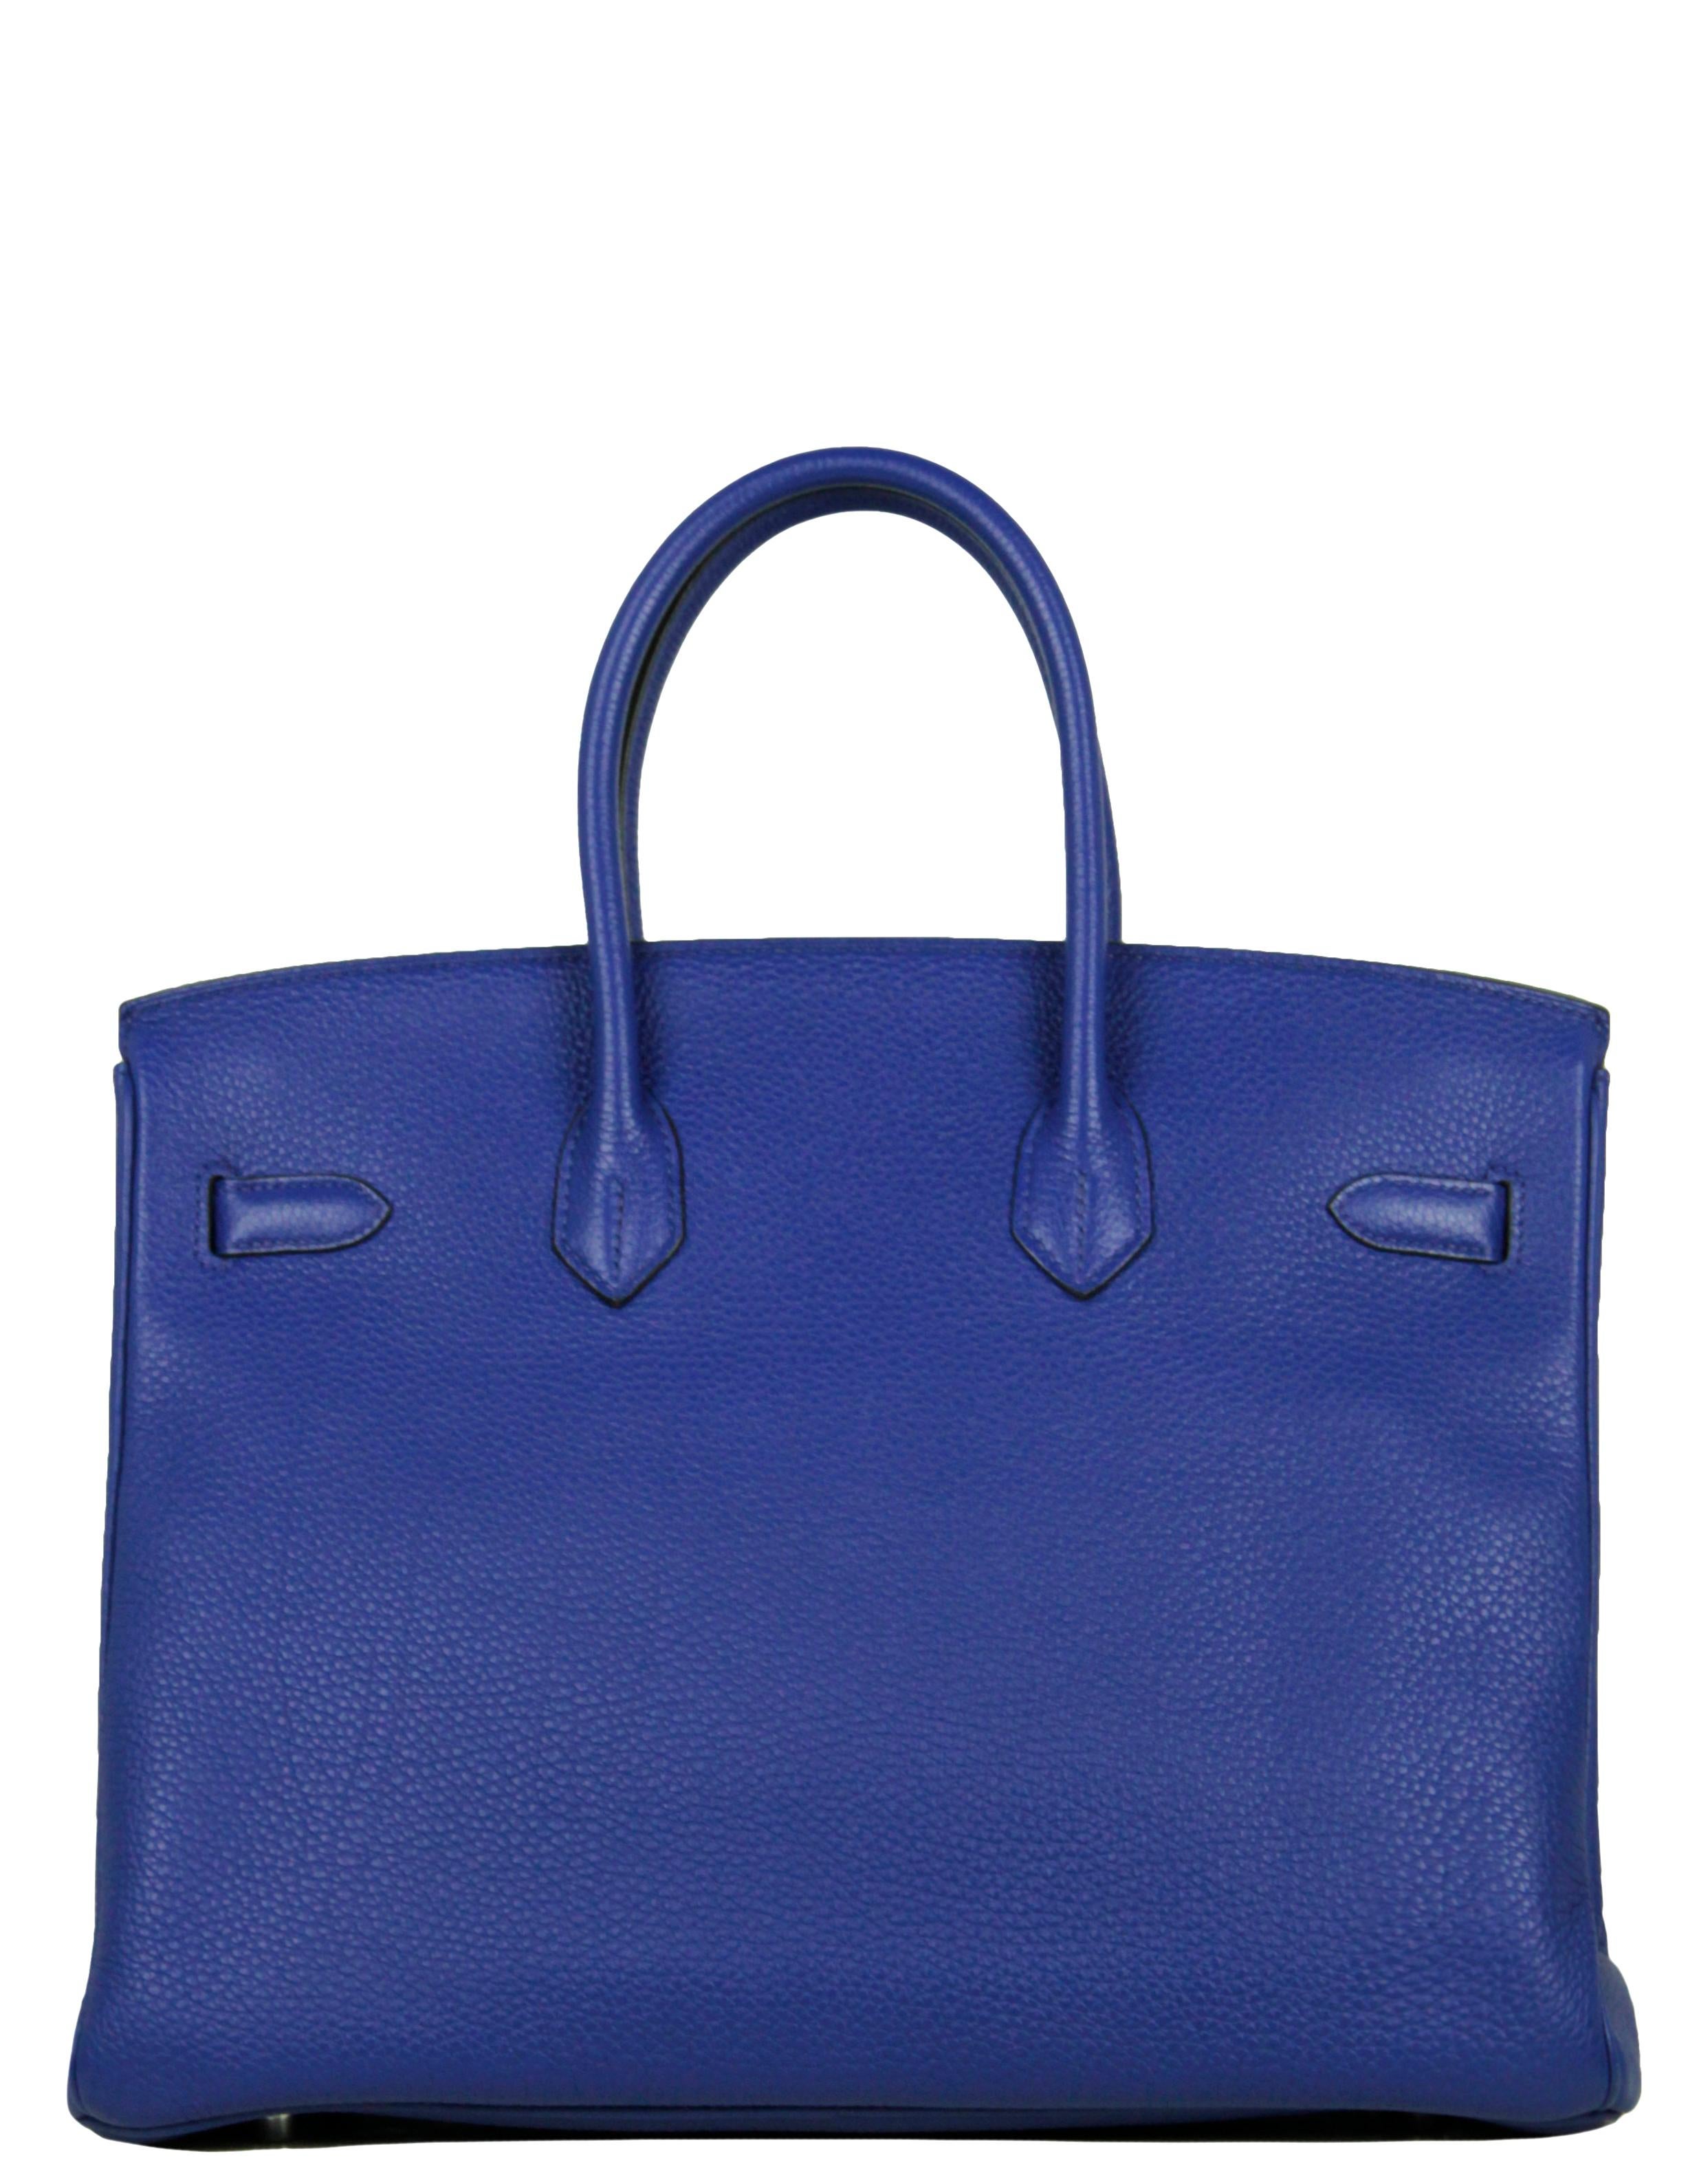 Hermes Blue Electric Togo Leather 35cm Birkin Bag

Made In: France
Year of Production: 2011
Color: Blue electric
Hardware: Silvertone palladium
Materials: Togo leather
Lining: Chevre leather
Closure/Opening: Double arm strap with twist lock
Interior